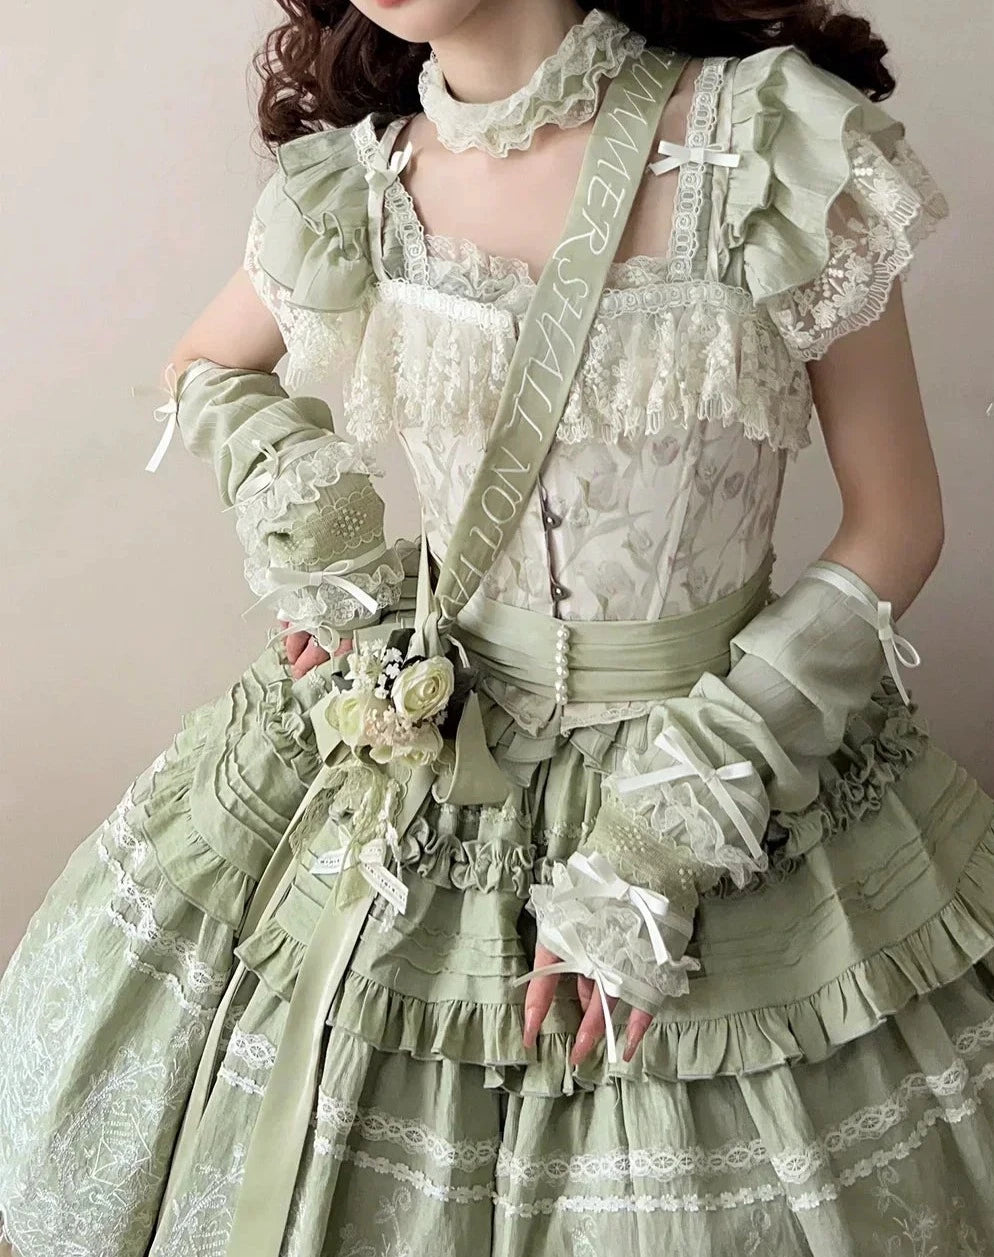 [Pre-orders available until 5/16] Set of short-sleeved top, camisole corset and skirt